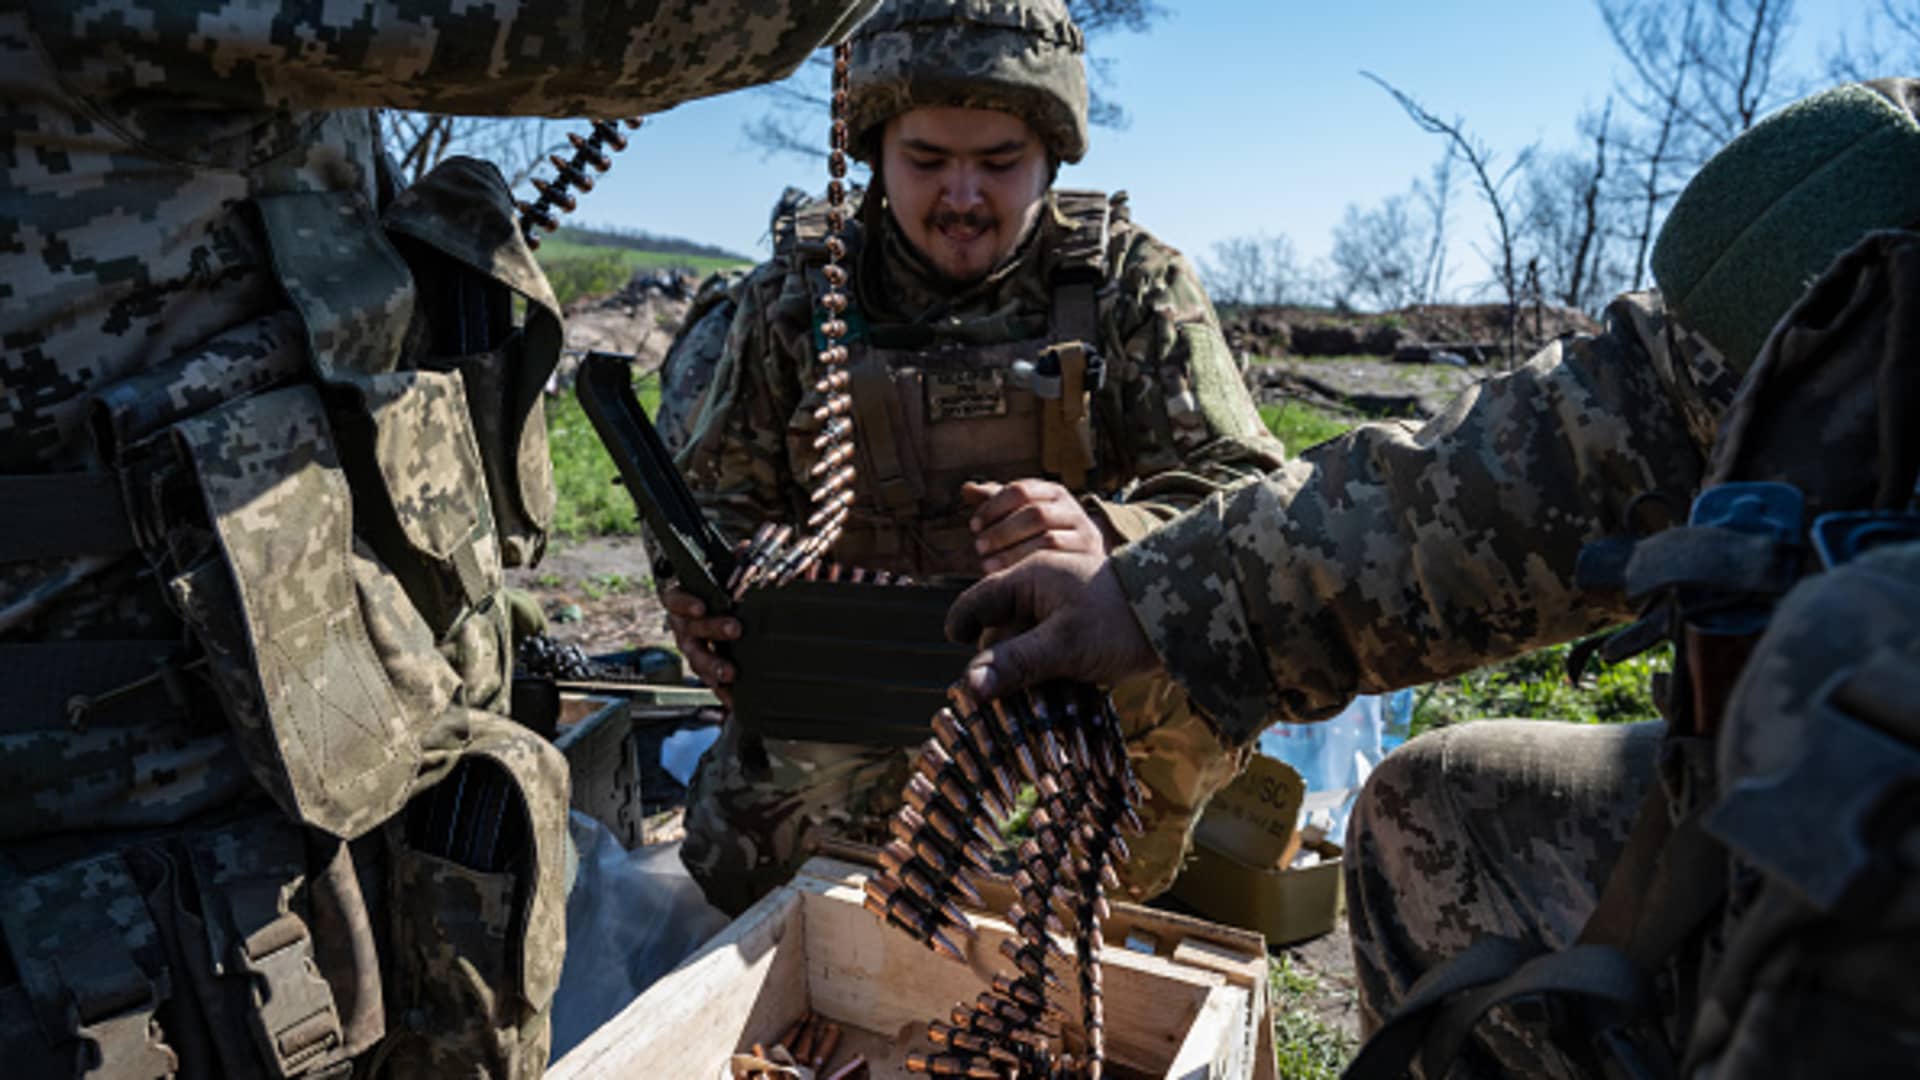 Ukrainian soldiers from the 28th Brigade put bullets into clips for use with light machine guns, as Ukrainian Armed Forces units train for a critical and imminent spring counteroffensive against Russian troops, which invaded 14 months earlier, in the Donbas region, Ukraine, on April 26, 2023. 